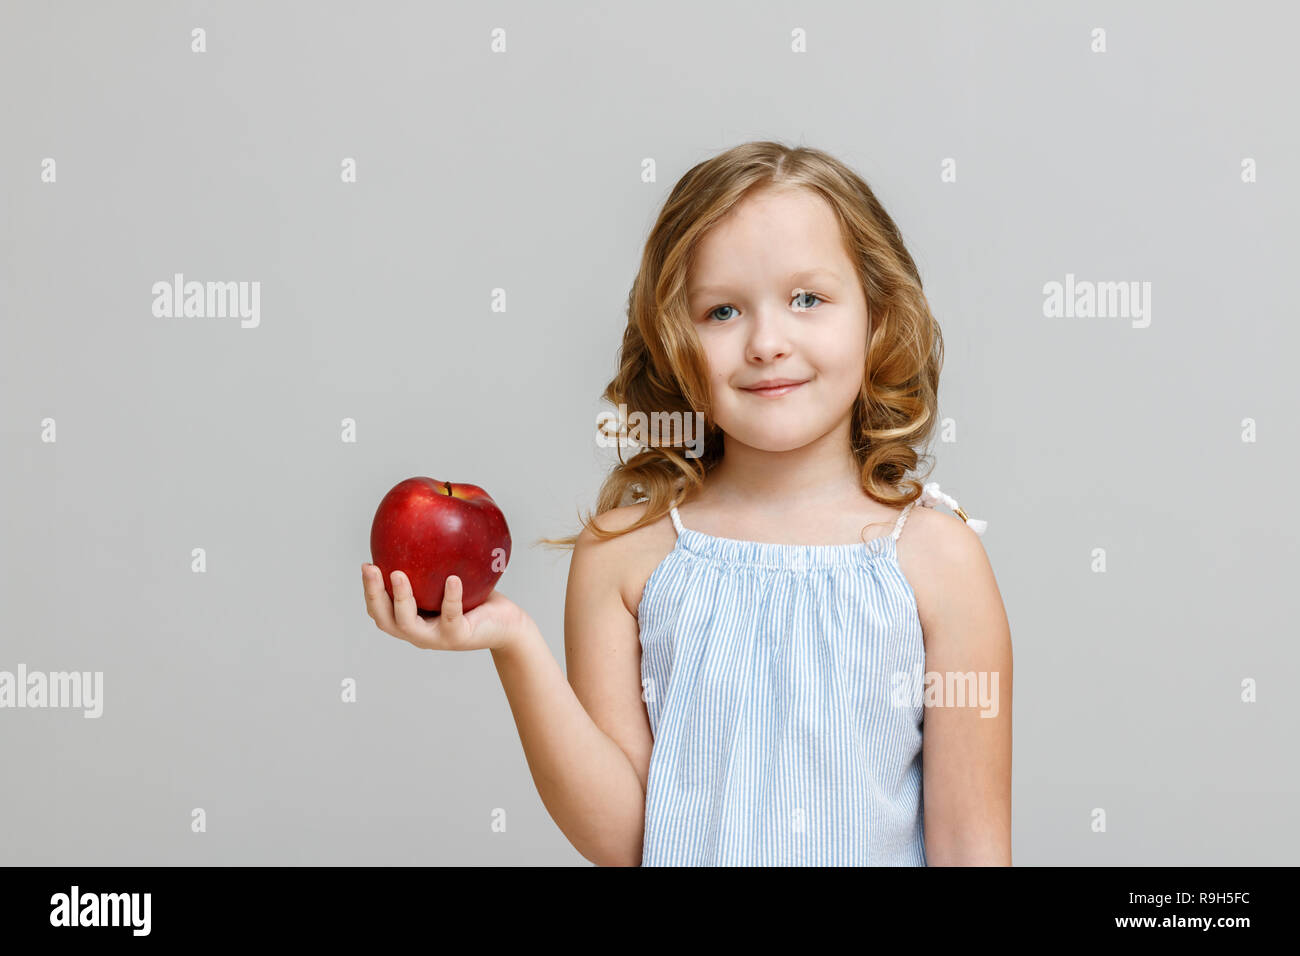 Portrait of a happy smiling little blonde girl on a gray background. The child is holding a red apple Stock Photo